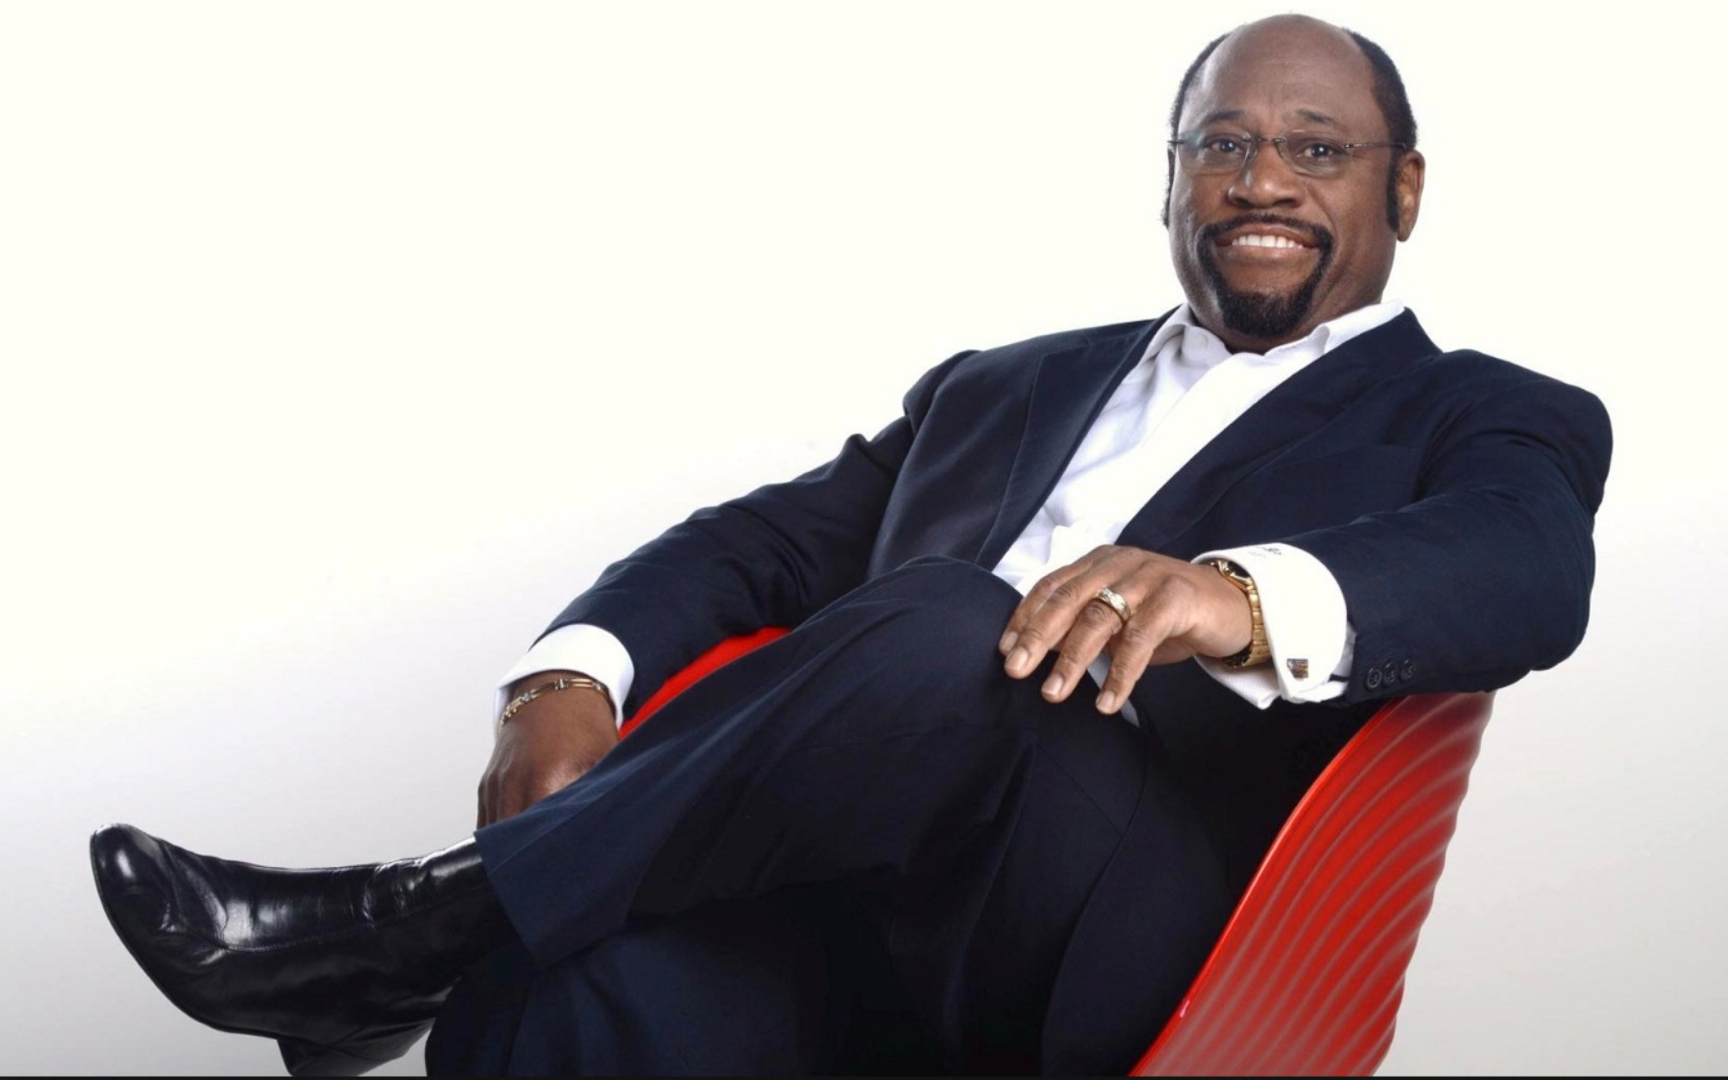 Myles Munroe (1954-2014) was a successful pastor